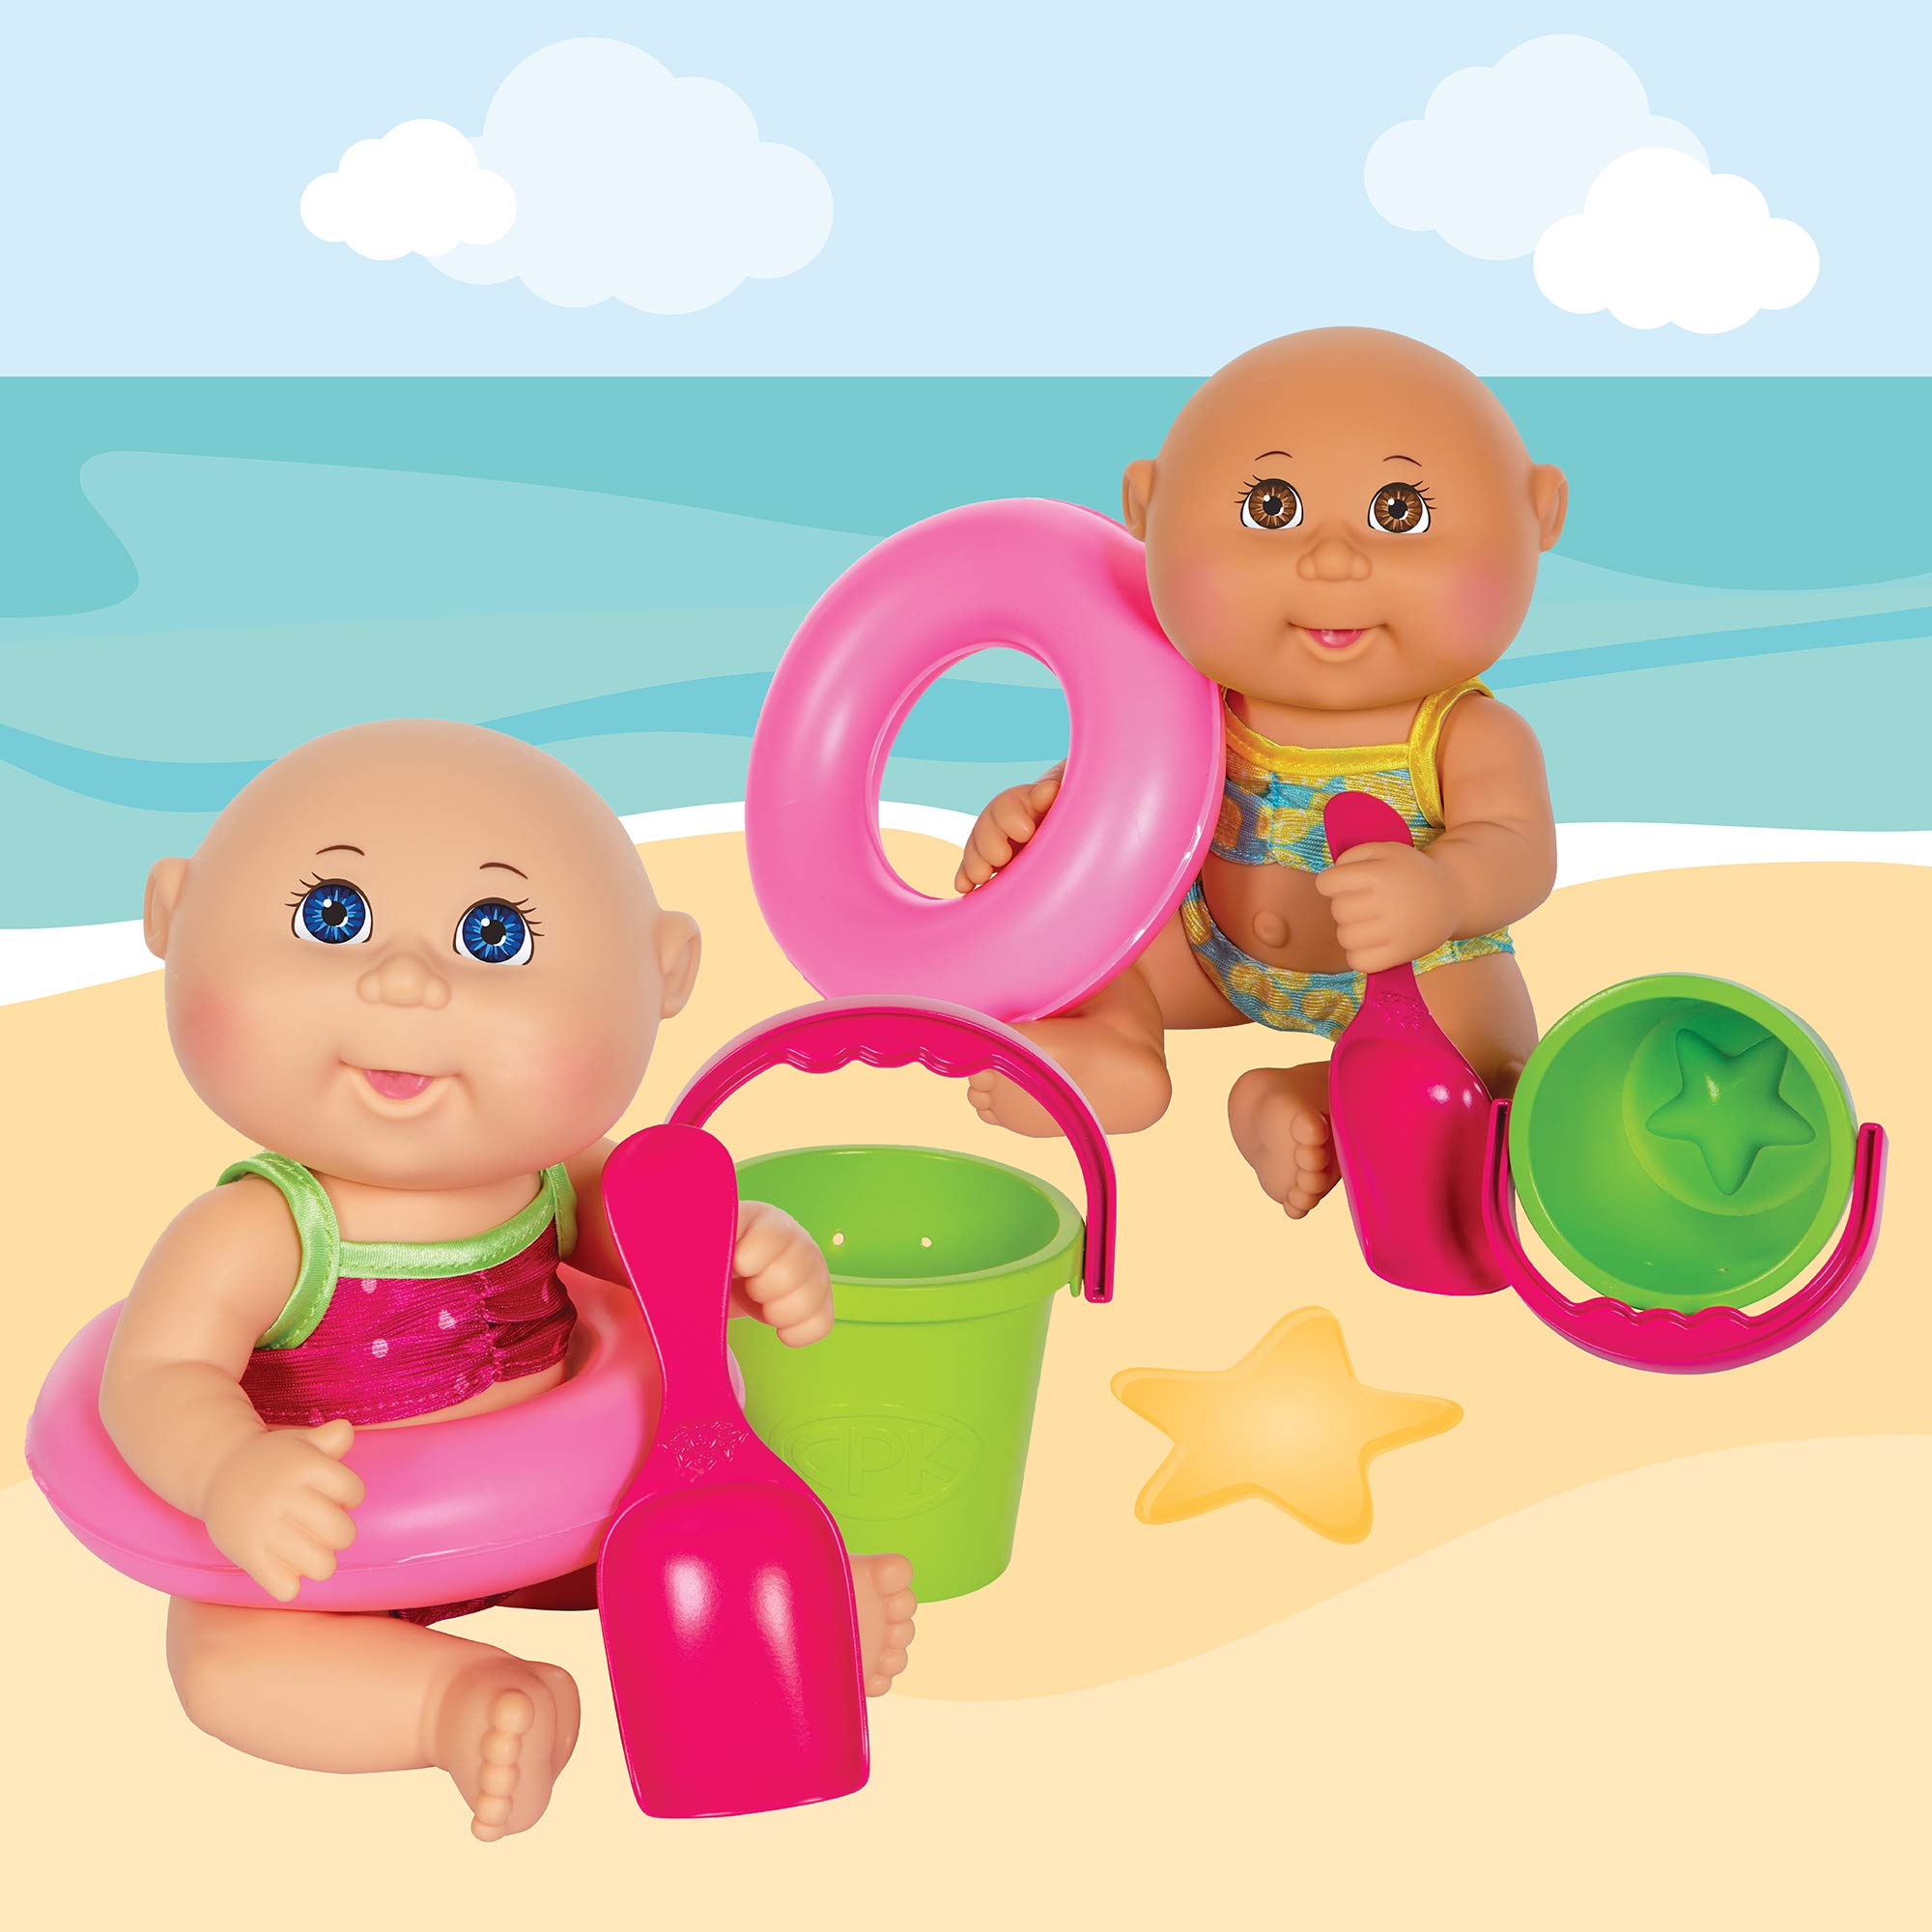 Cabbage Patch Kids Beach Time Tiny Newborn with Pink Toy Floatie, Pail and Shovel and Watermelon Swimsuit - 9 Inch CPK Dolls - Grow Your Cabbage Patch - Play in Or Out of Water